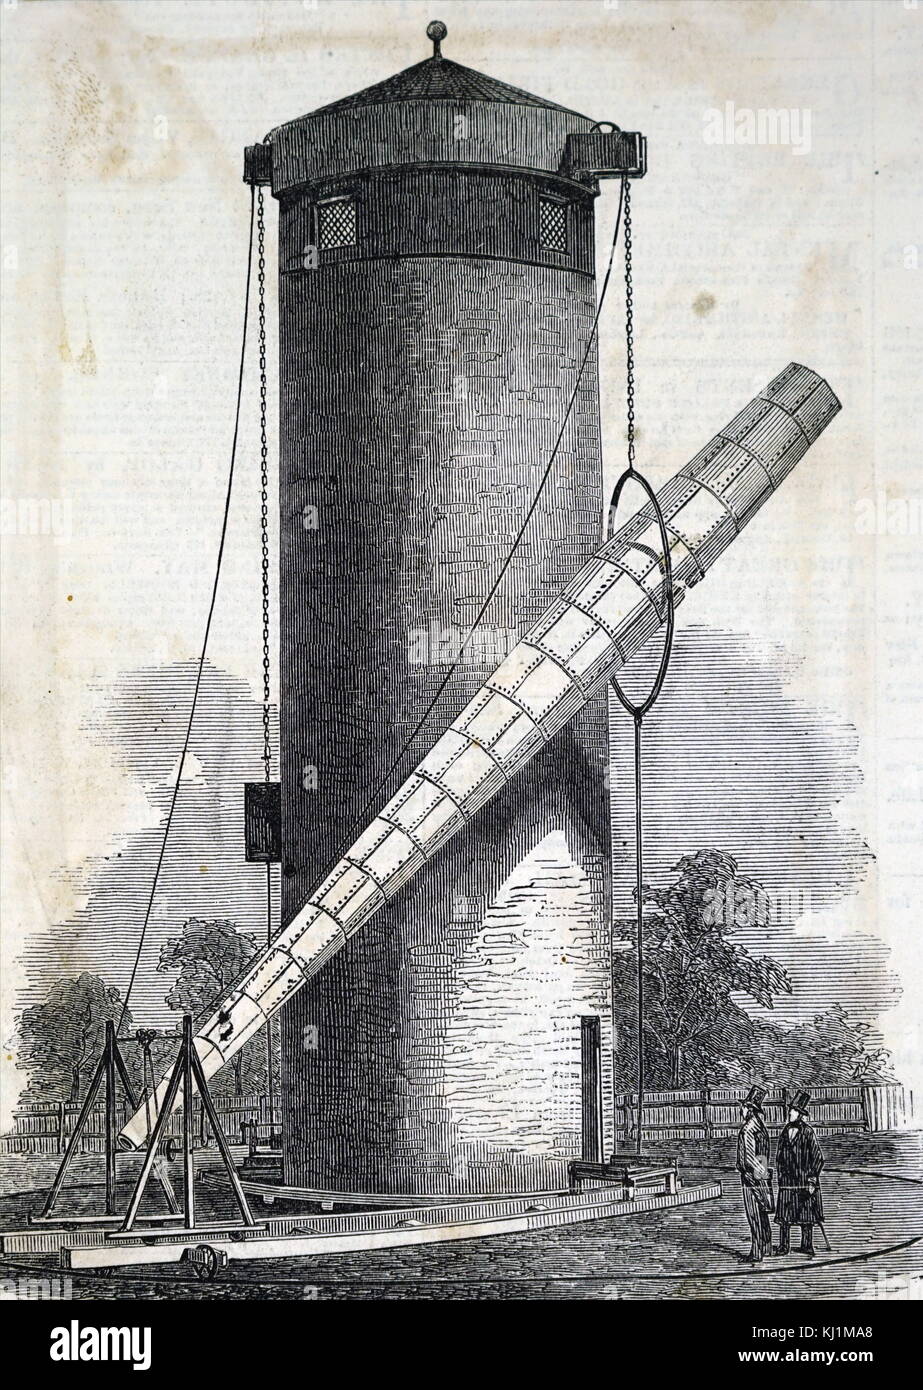 Engraving depicting the Craig telescope, a large telescope built in the 1850s, and while much larger than previous refracting telescopes. Dated 19th Century Stock Photo